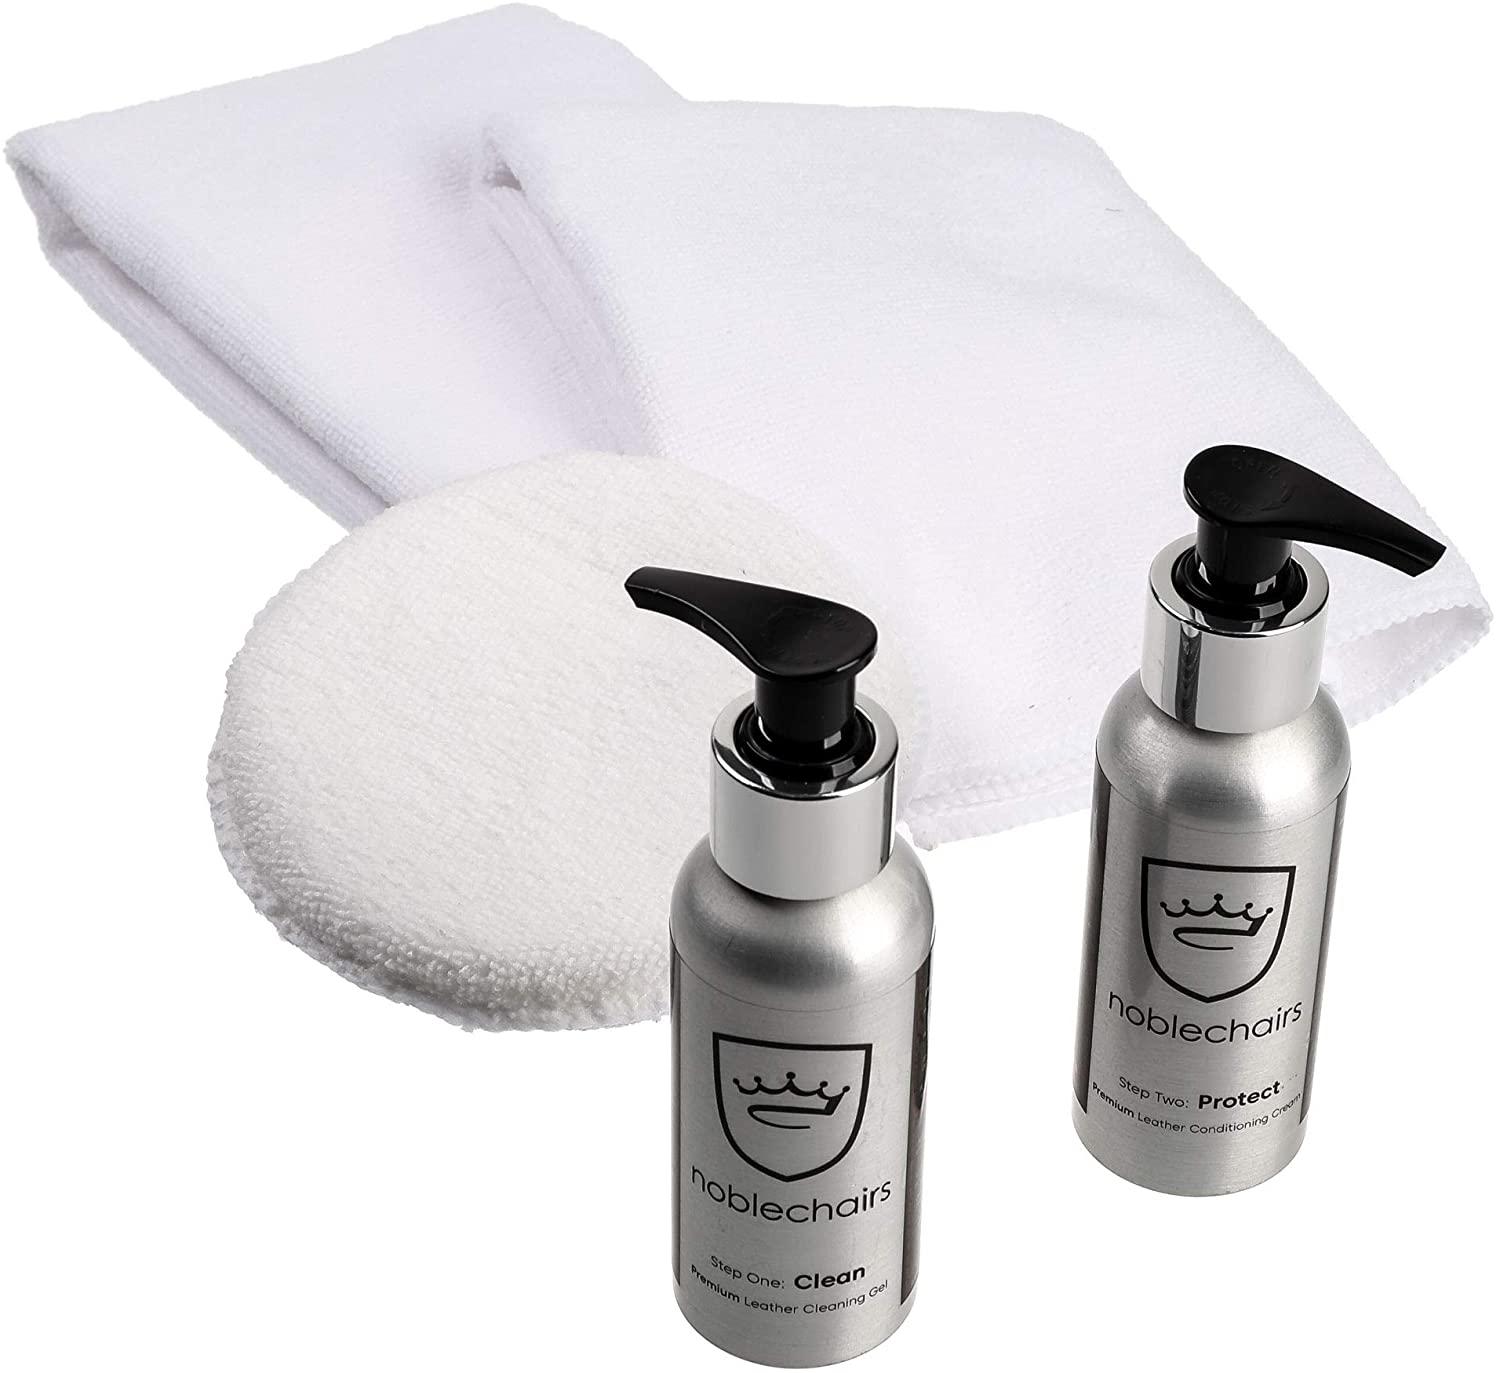 Noblechairs Premium Care & Cleaning kit